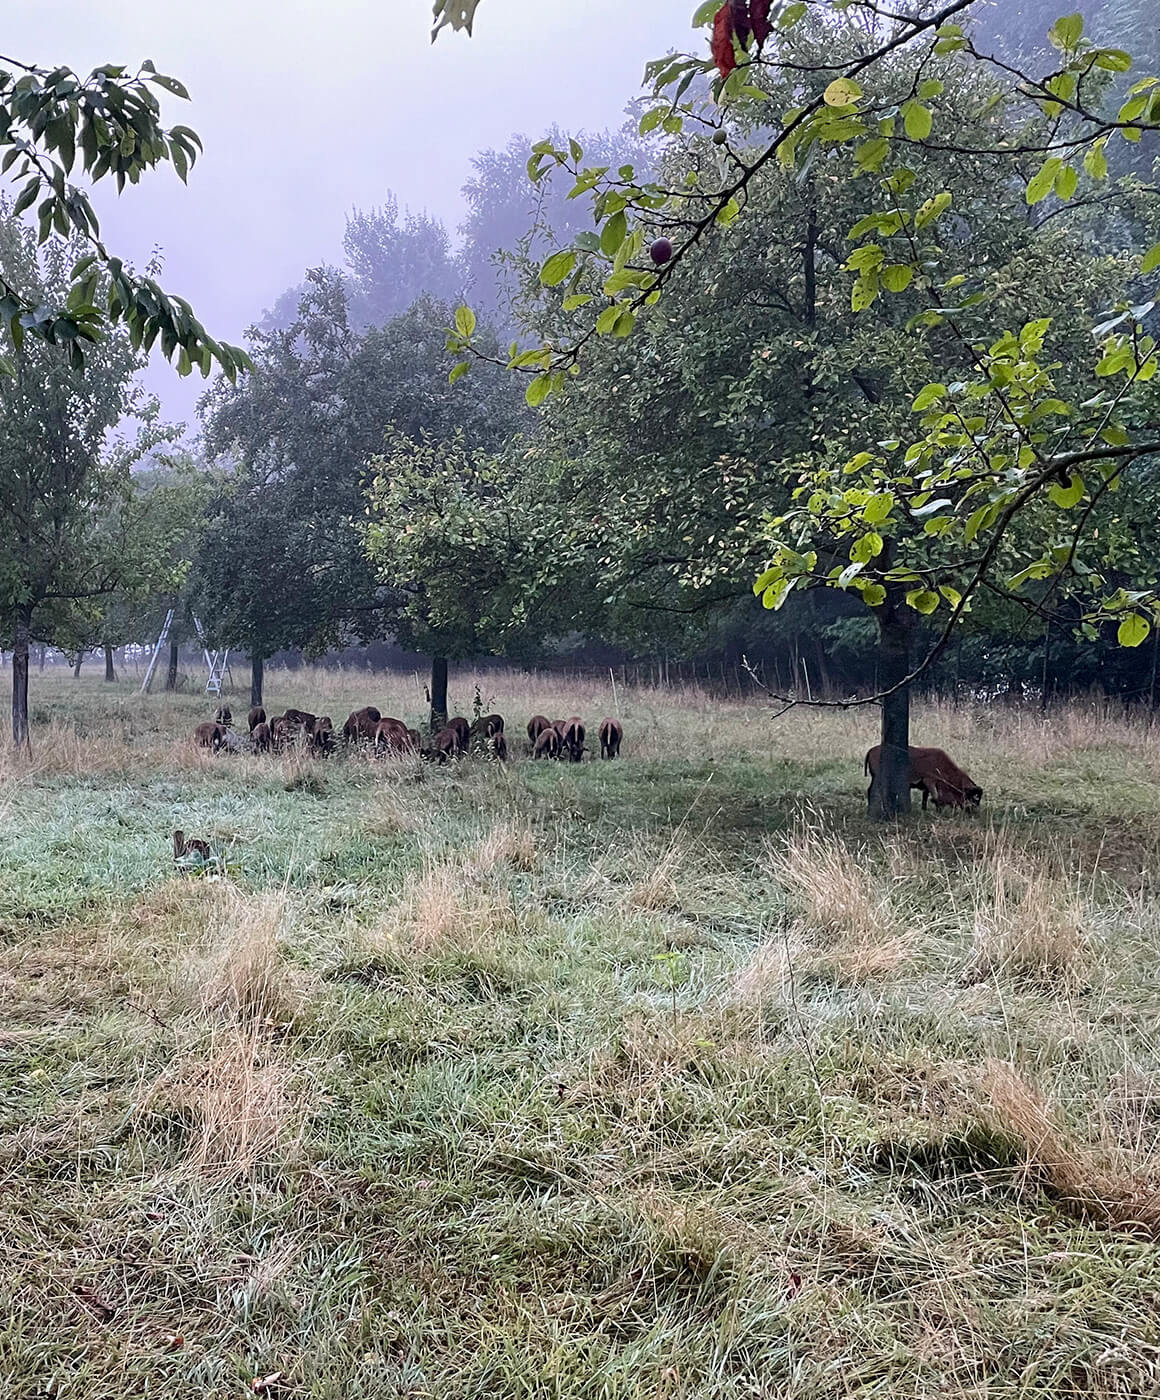 Cameroon sheep in the orchard on a misty day